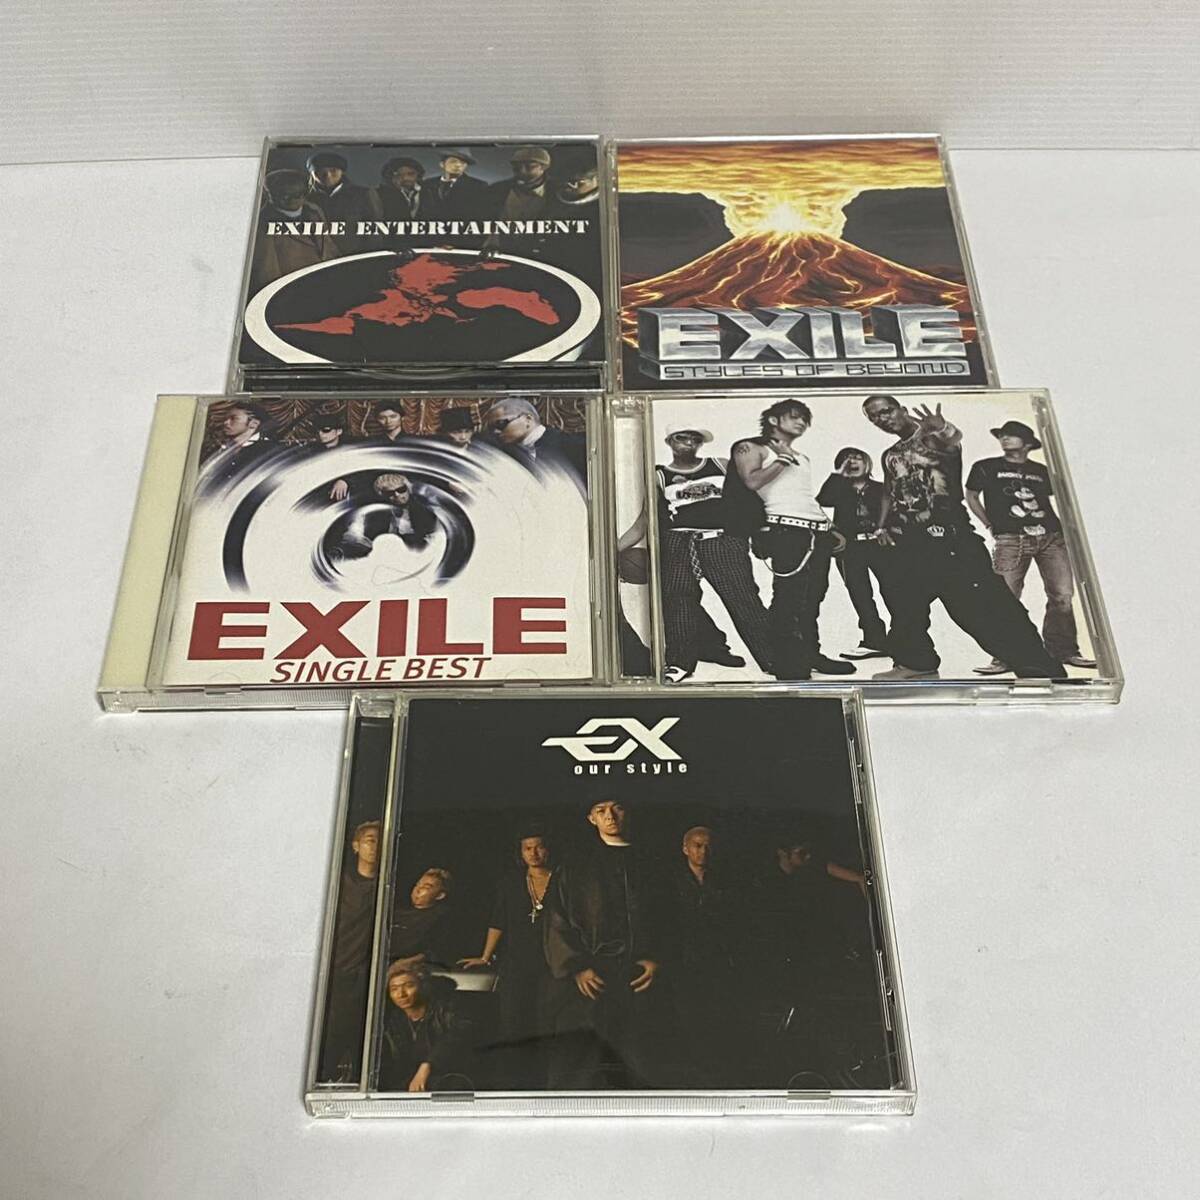 EXILE CD 5枚セット / Styles Of Beyond / SCREAM / OUR STYLE / ENTERTAINMENT / SINGLE BESTの画像1